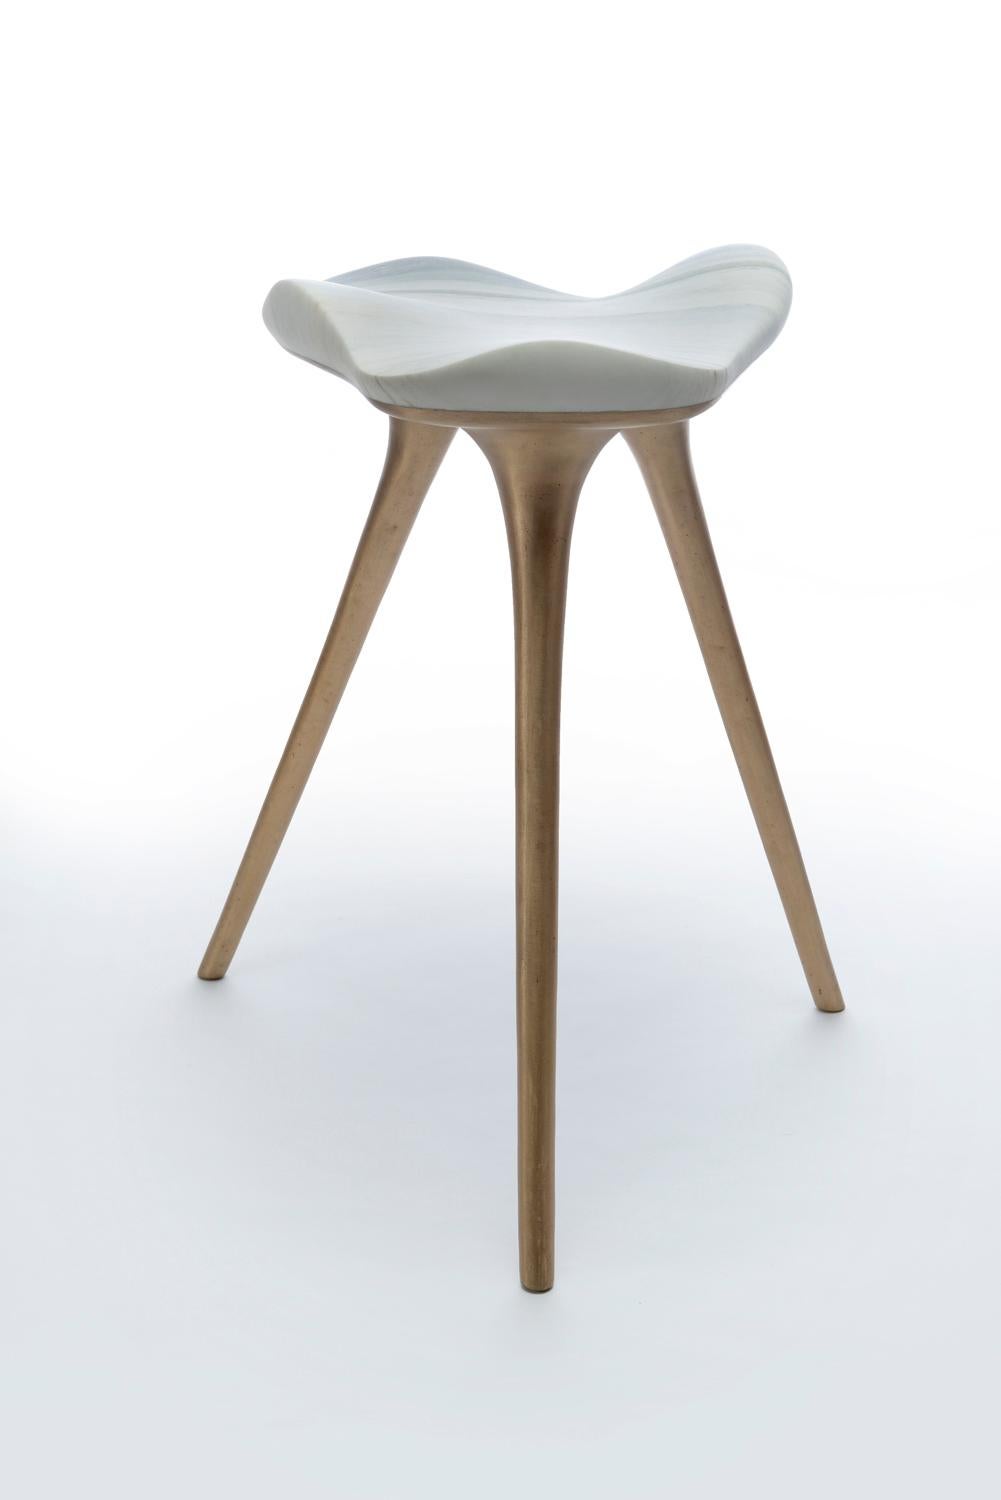 Contemporary Nuvola Stool in Vermont Marble and Bronze by Stephen Shaheen For Sale